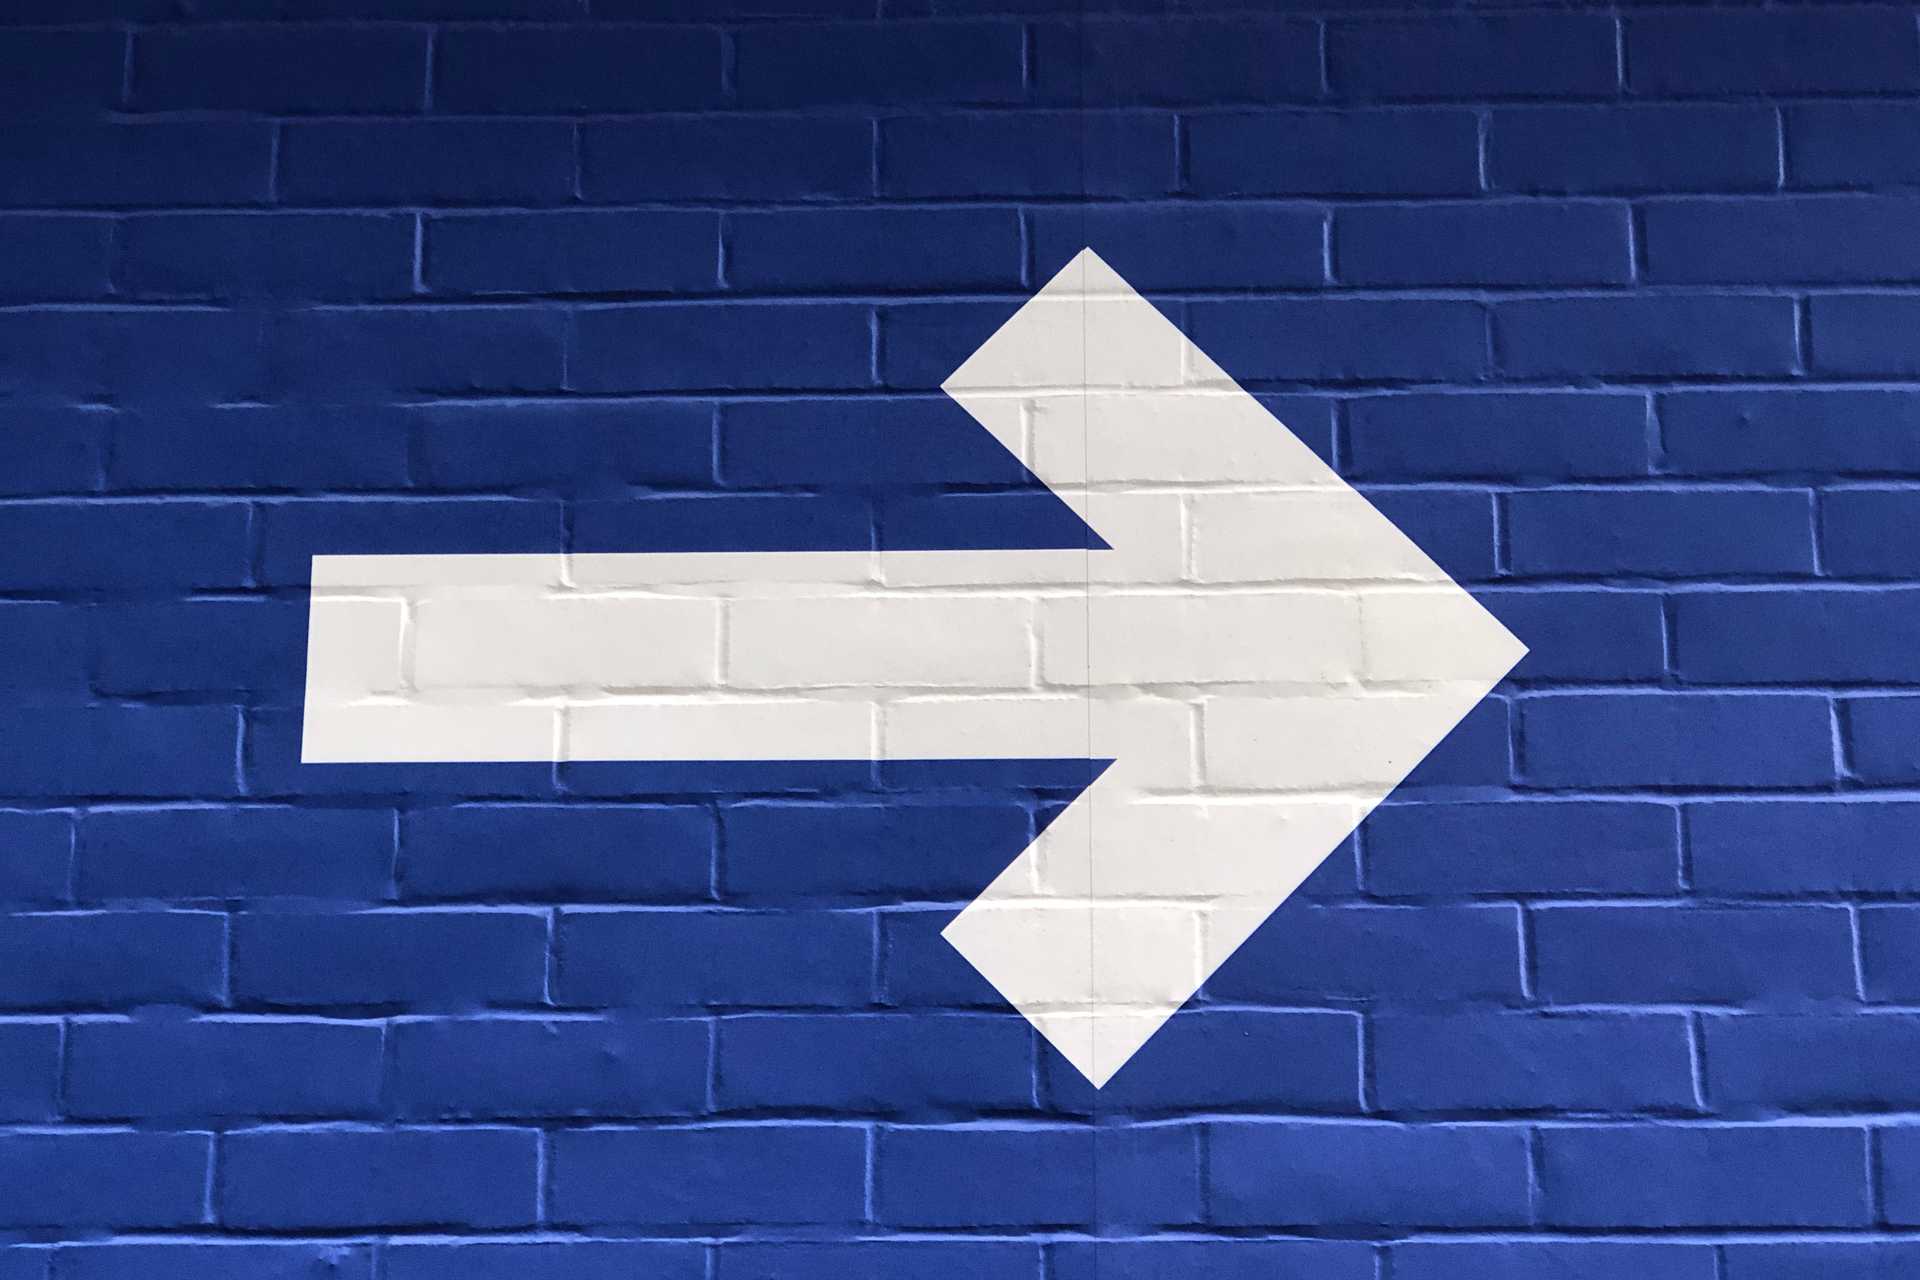 white arrow and blue background painted on bricks showing the onward, the way forward